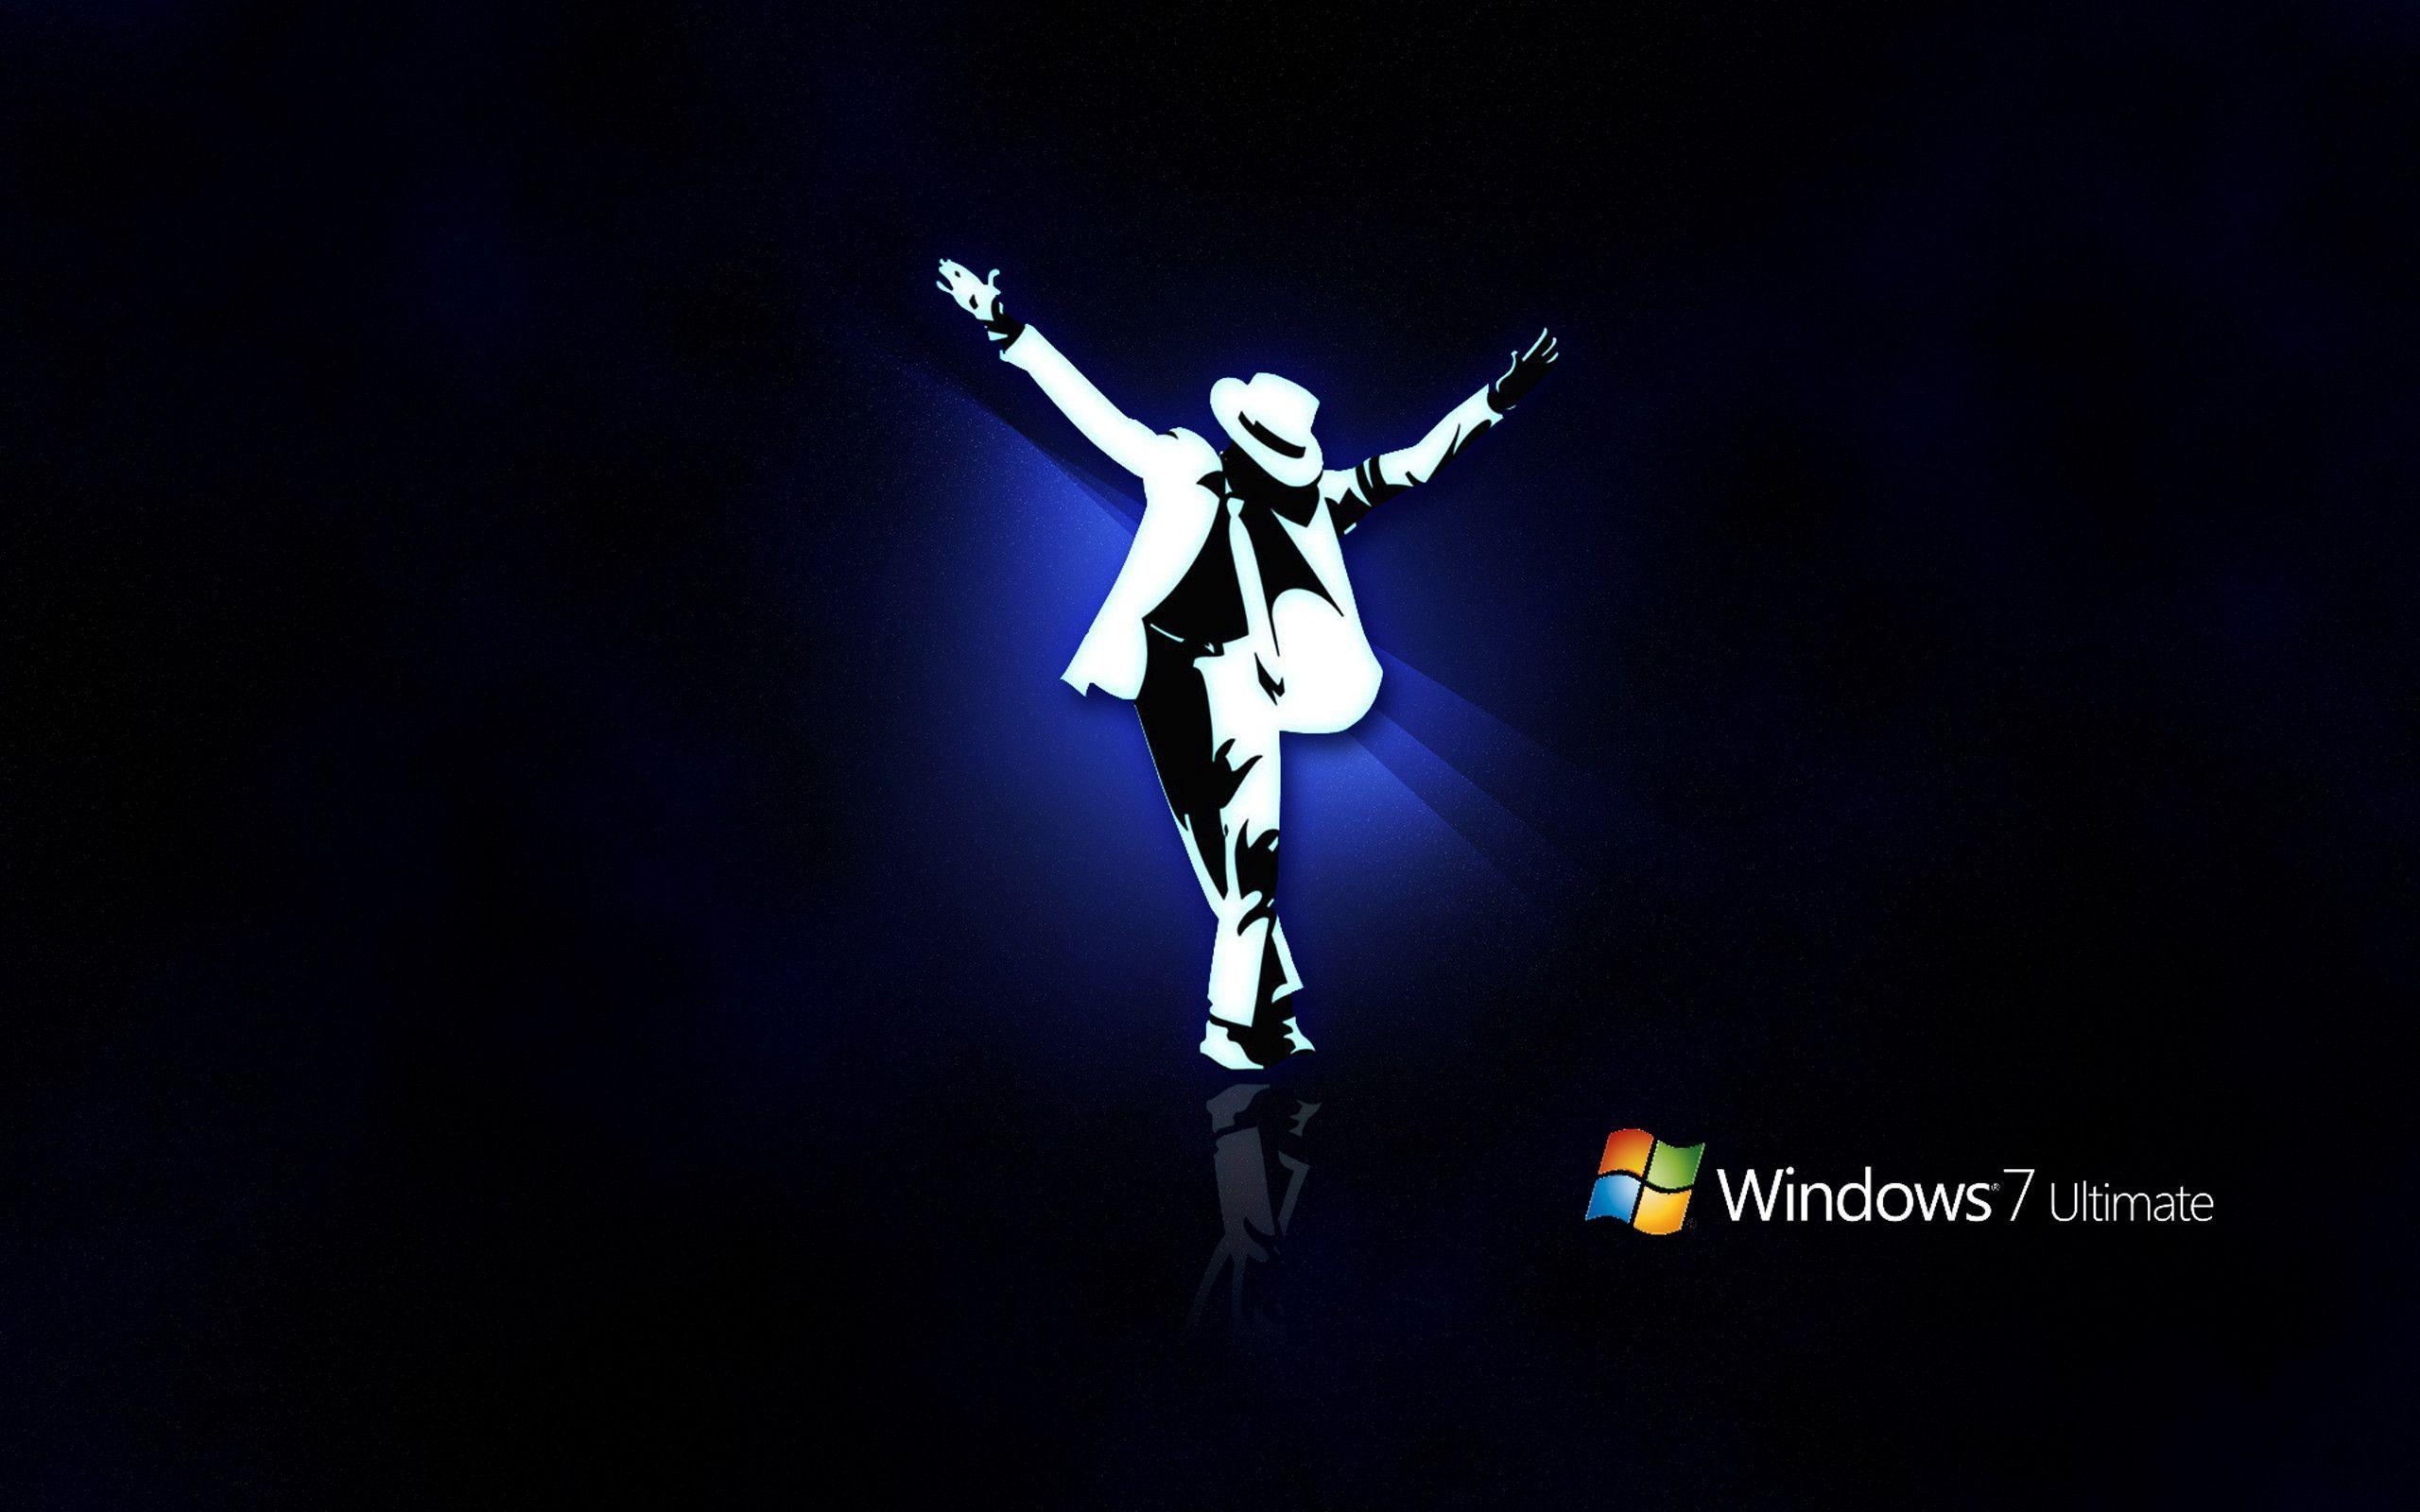 Free Wallpaper For Windows 7 Ultimate